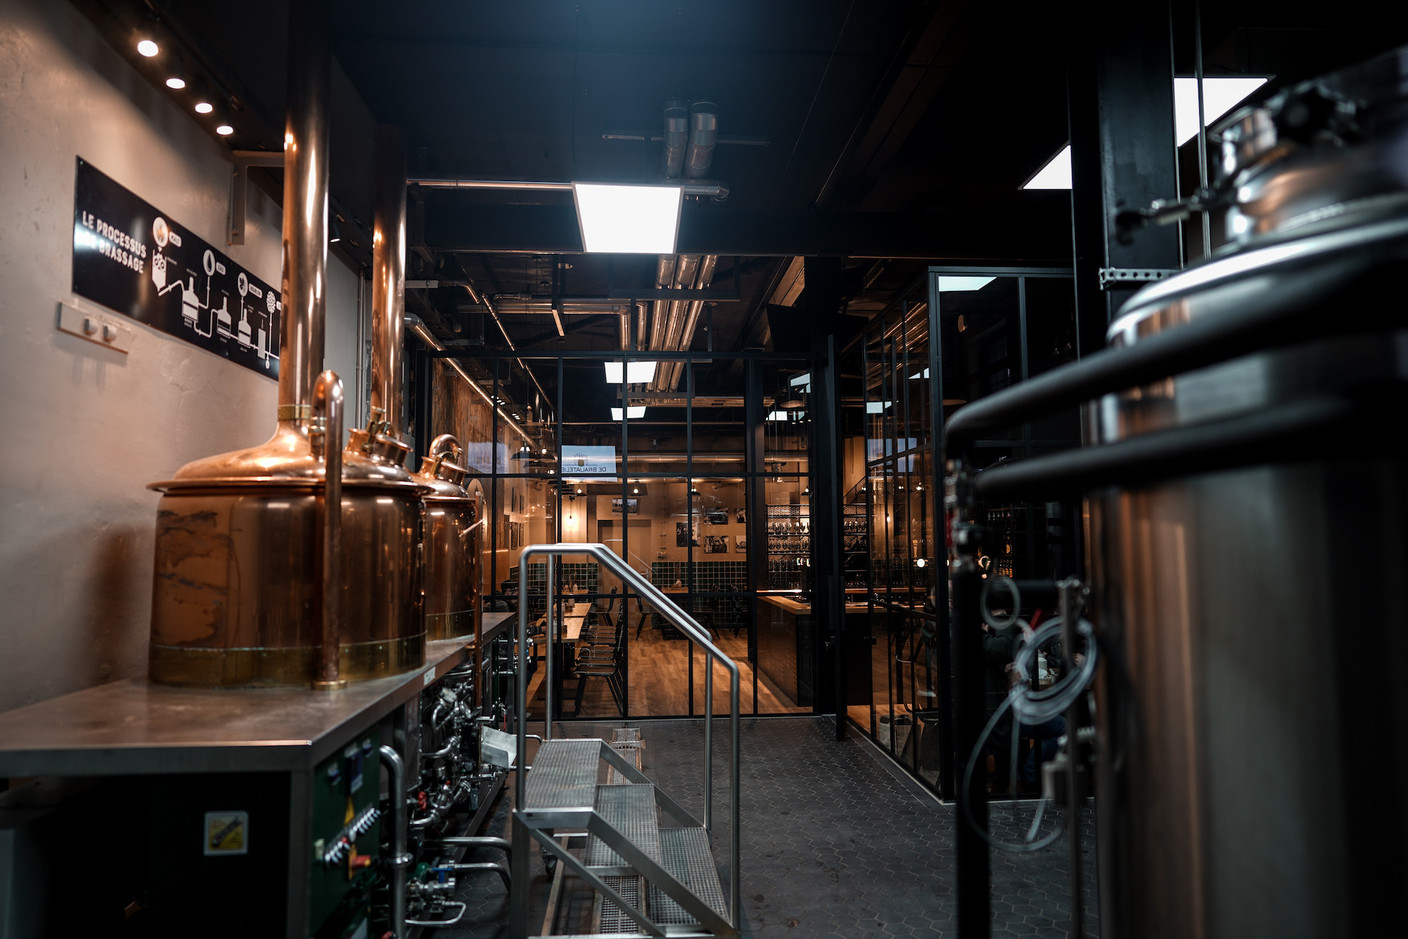 At the BrauAtelier of the Brasserie Nationale, there is no ambiguity about the core product: we are here to make local beer!  (Photo: Brasserie Nationale)